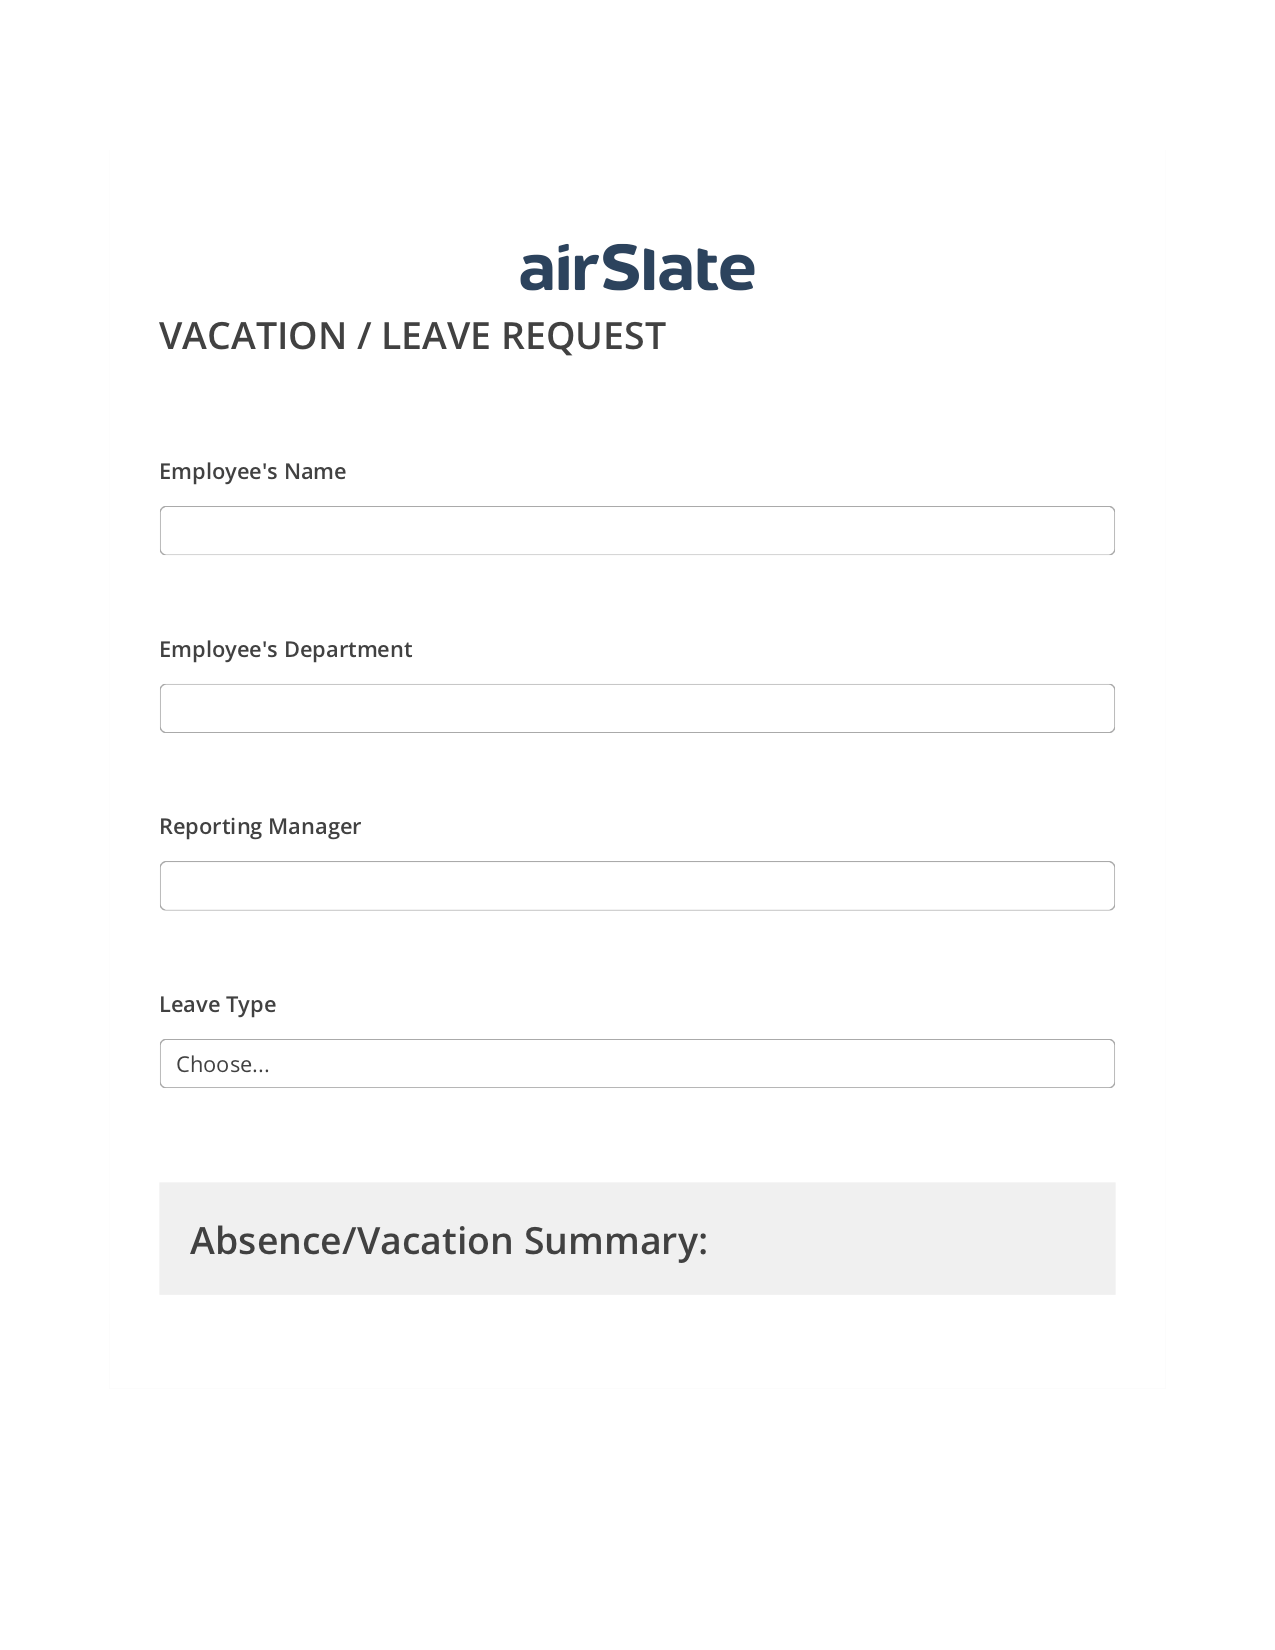 Vacation/Leave Request Workflow Pre-fill from CSV File Bot, Remove Slate Bot, Archive to Box Bot